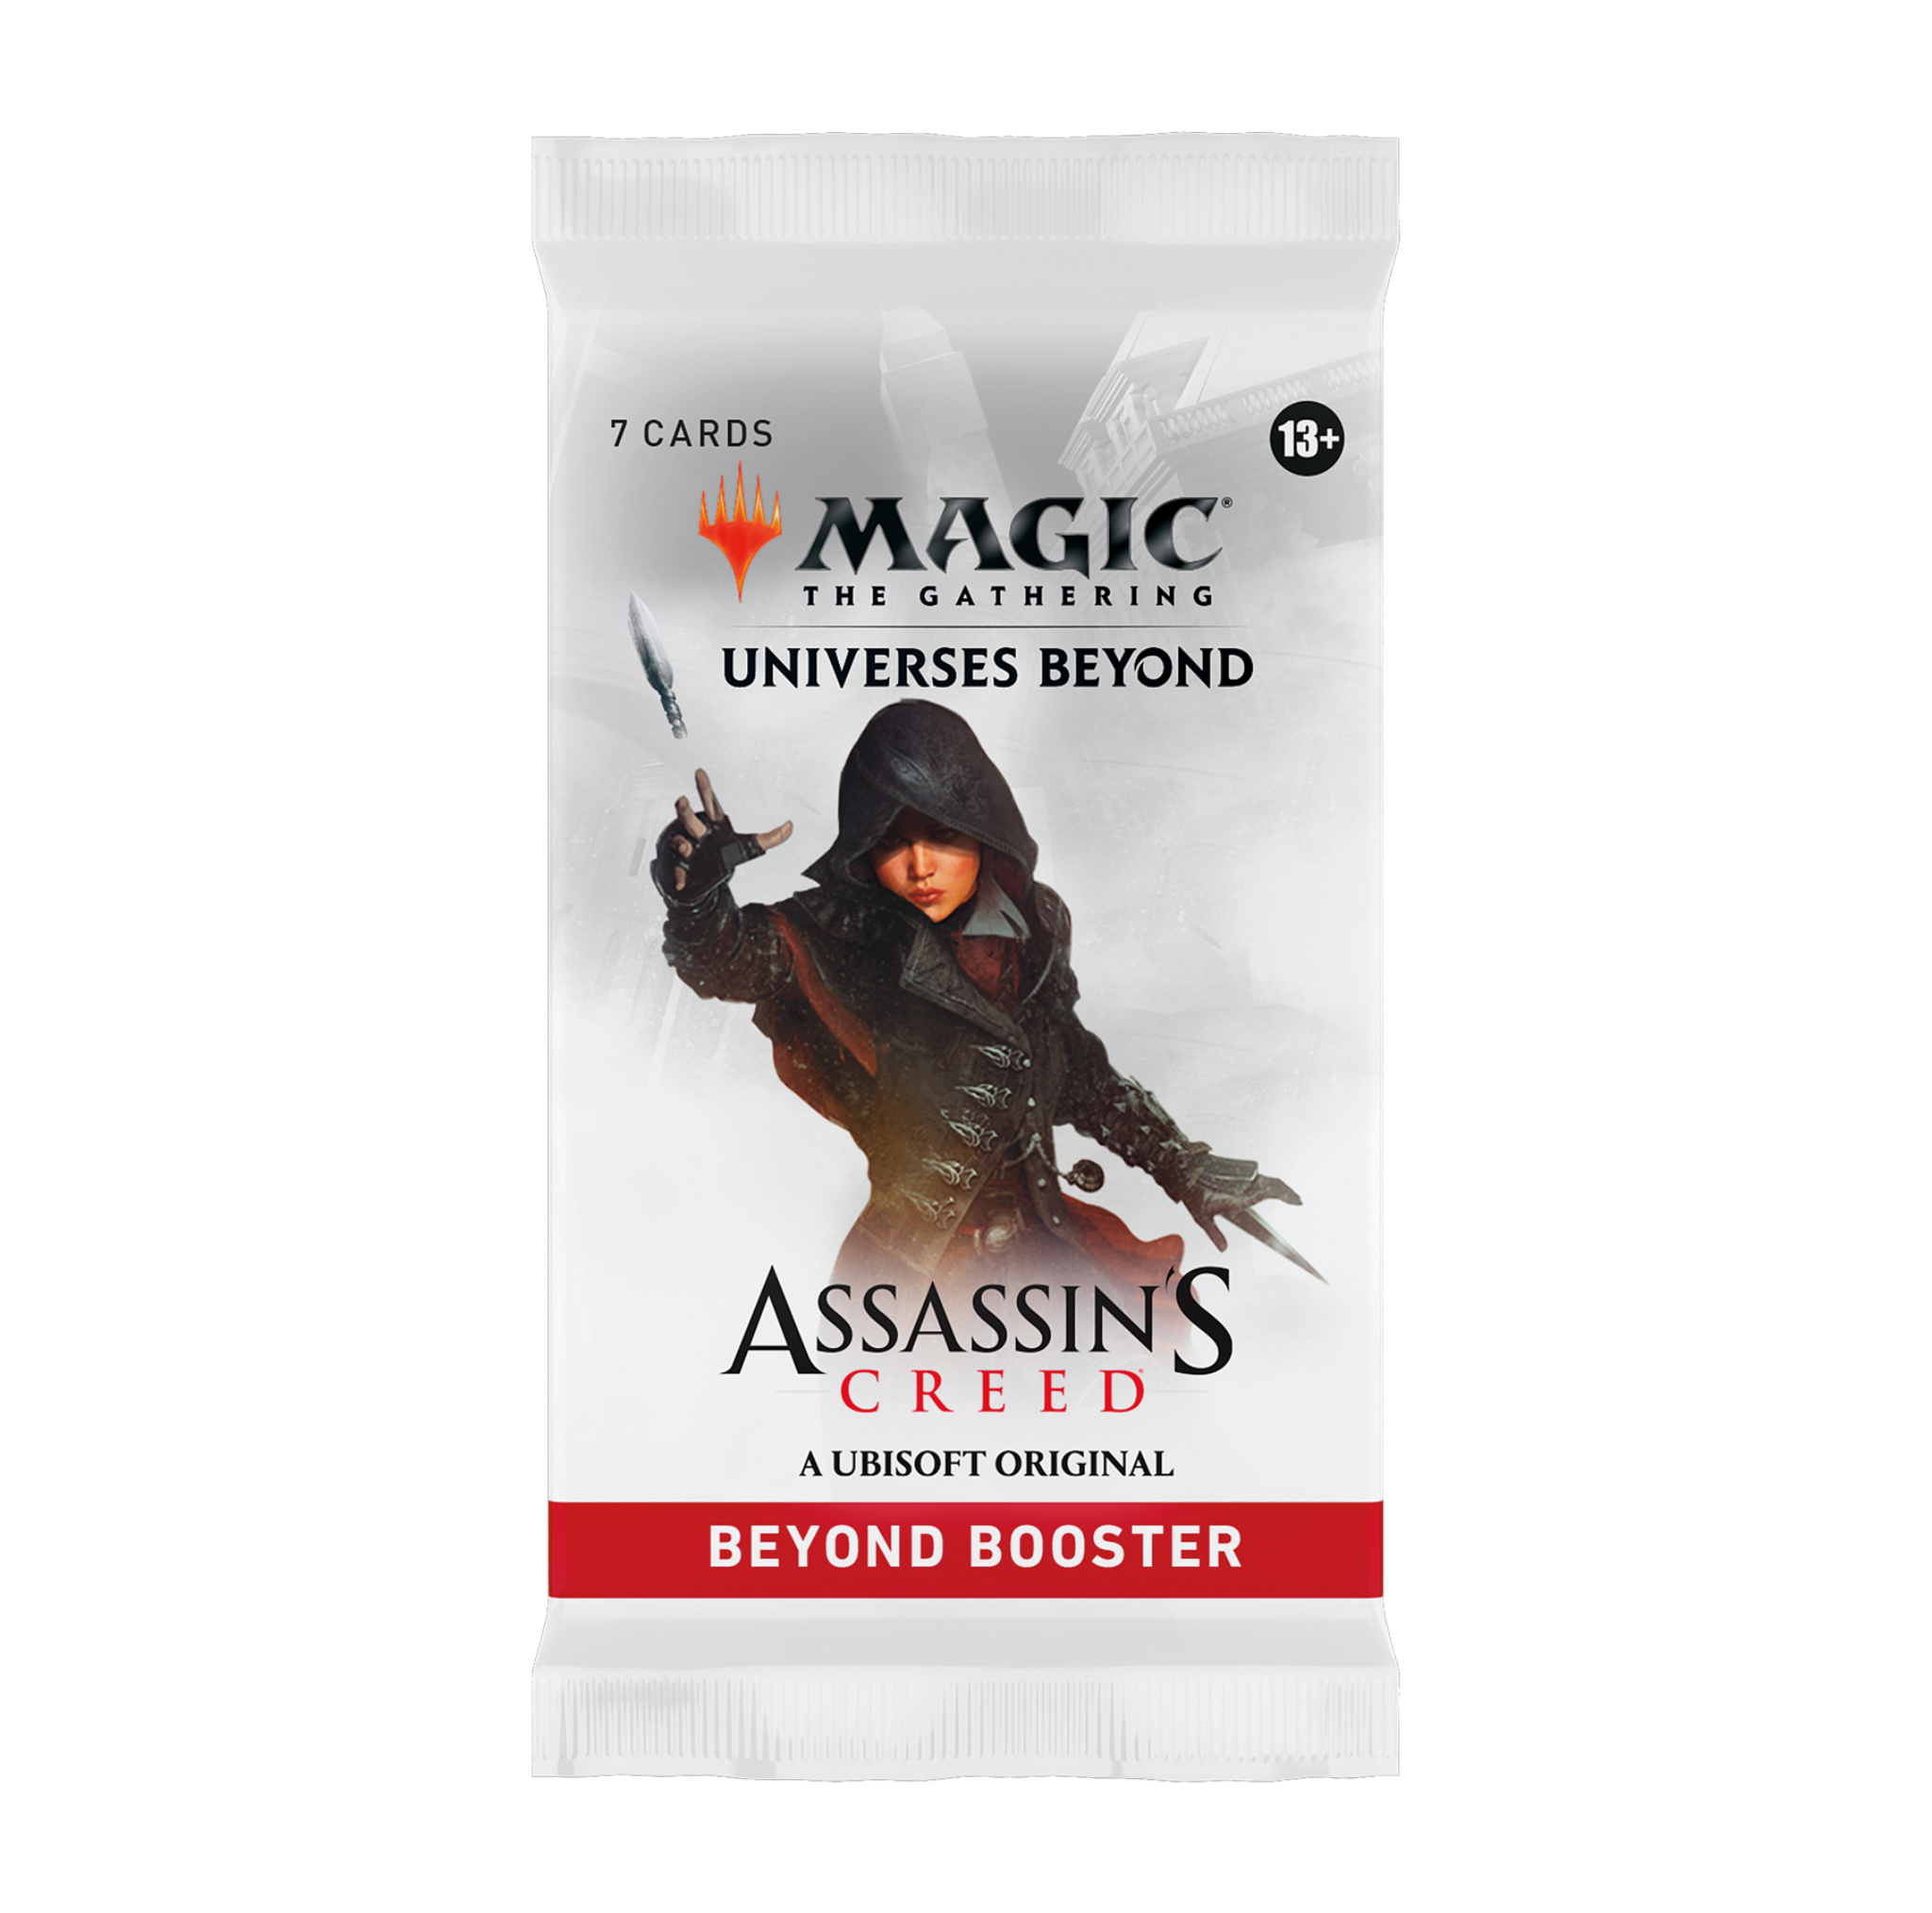 Magic: The Gathering - Universes Beyond: Assassin's Creed - Beyond-Booster-Display - EN